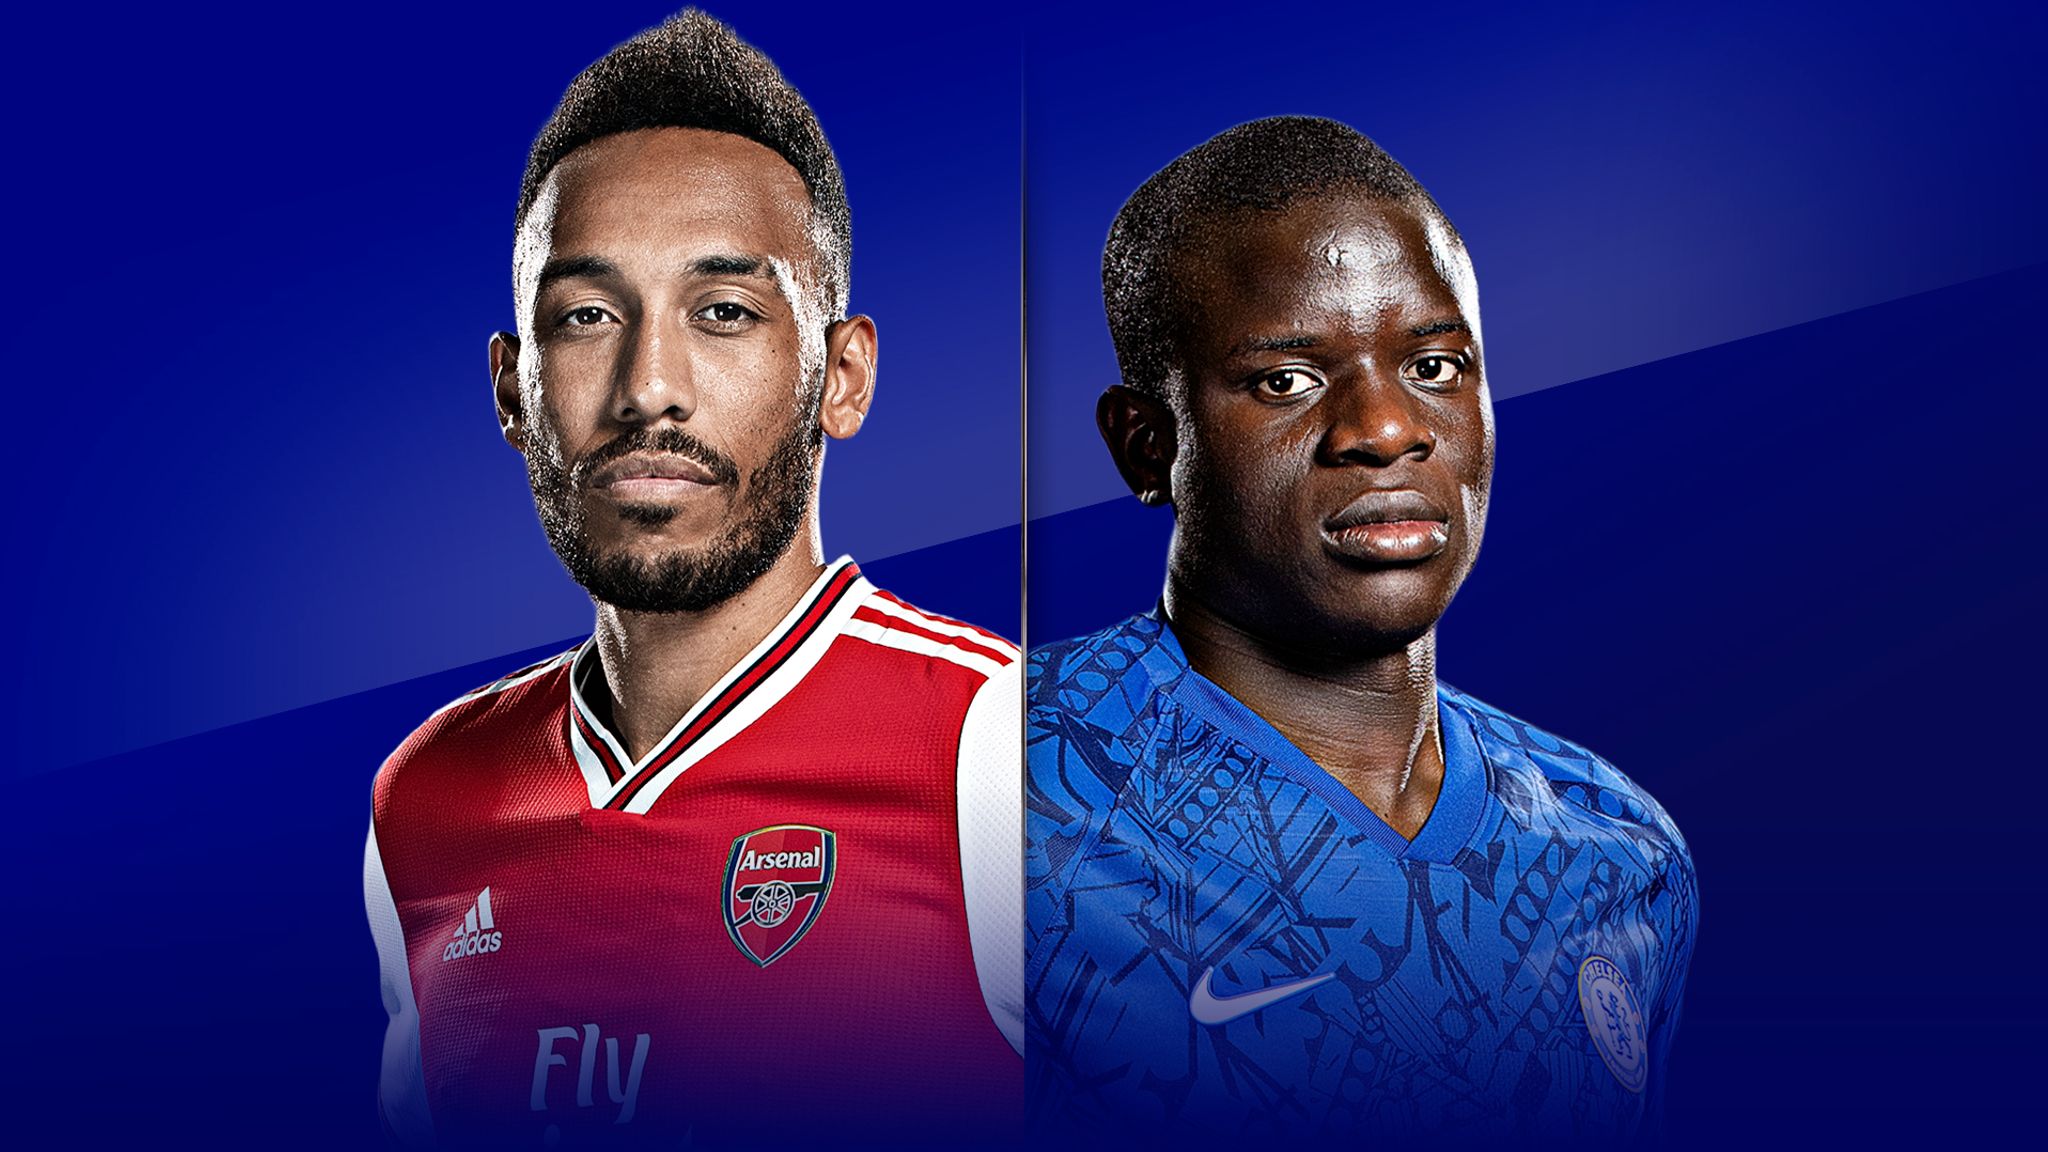 Live match preview - Arsenal vs Chelsea 29.12.2019